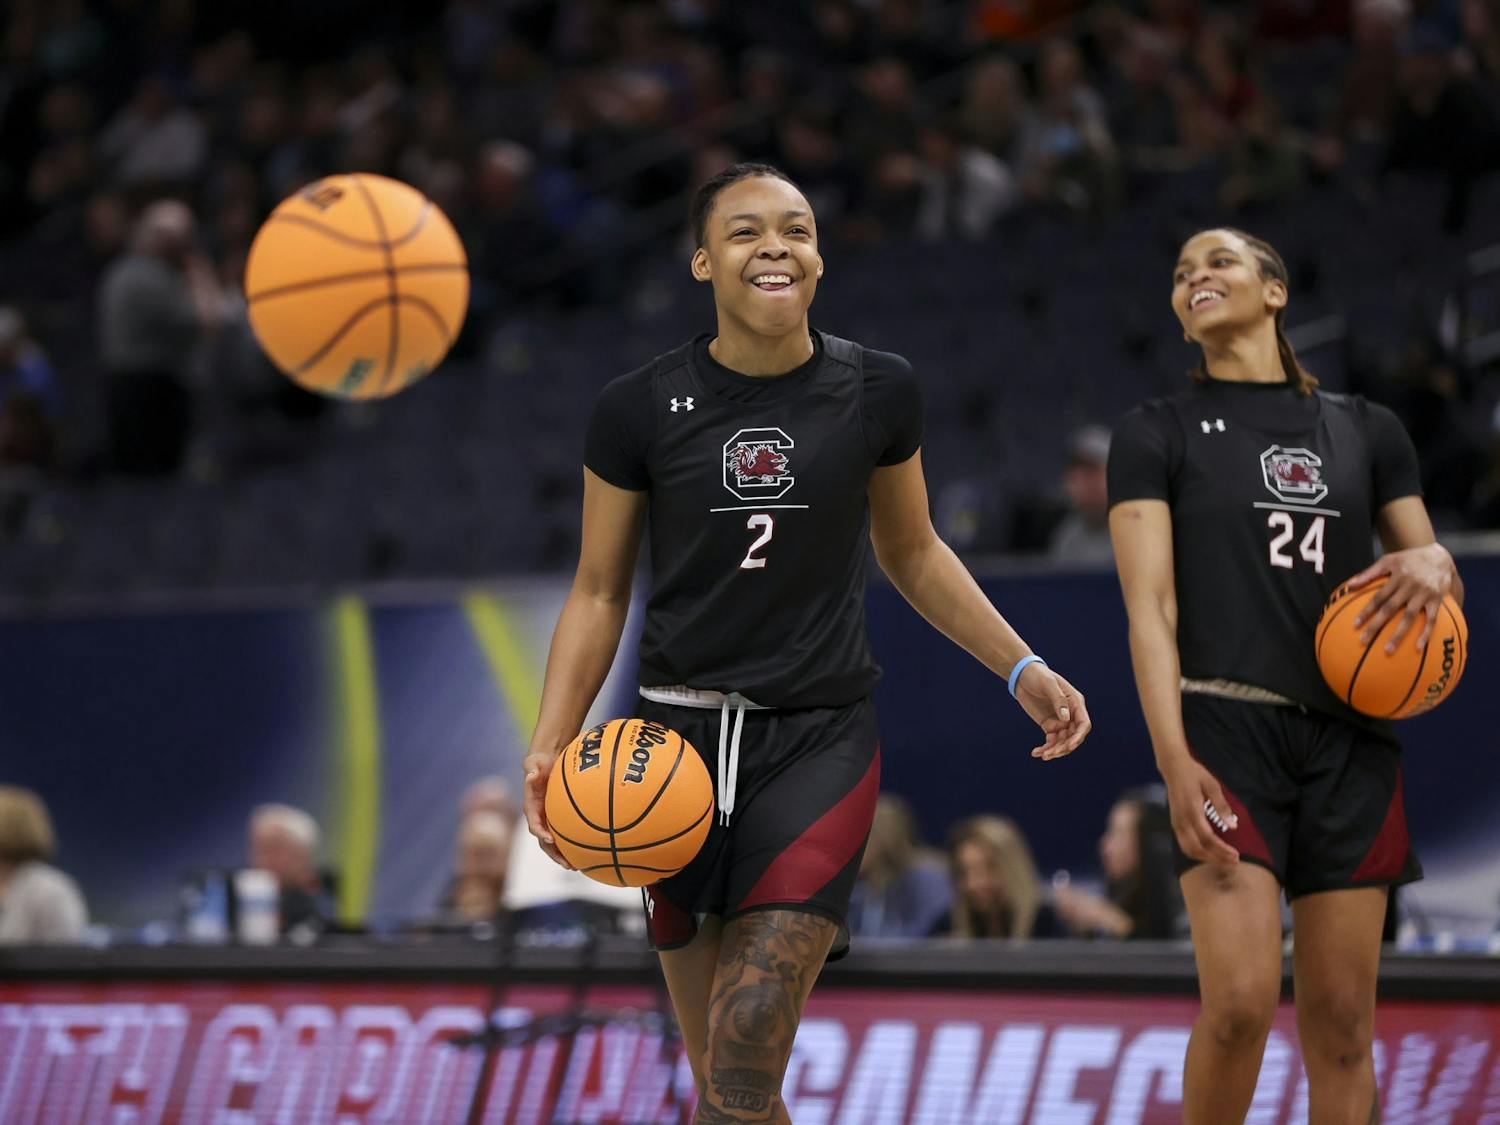 Sophomore guard Eniya Russell during South Carolina womens basketball's open practice in the Target Center on April 2, 2022.